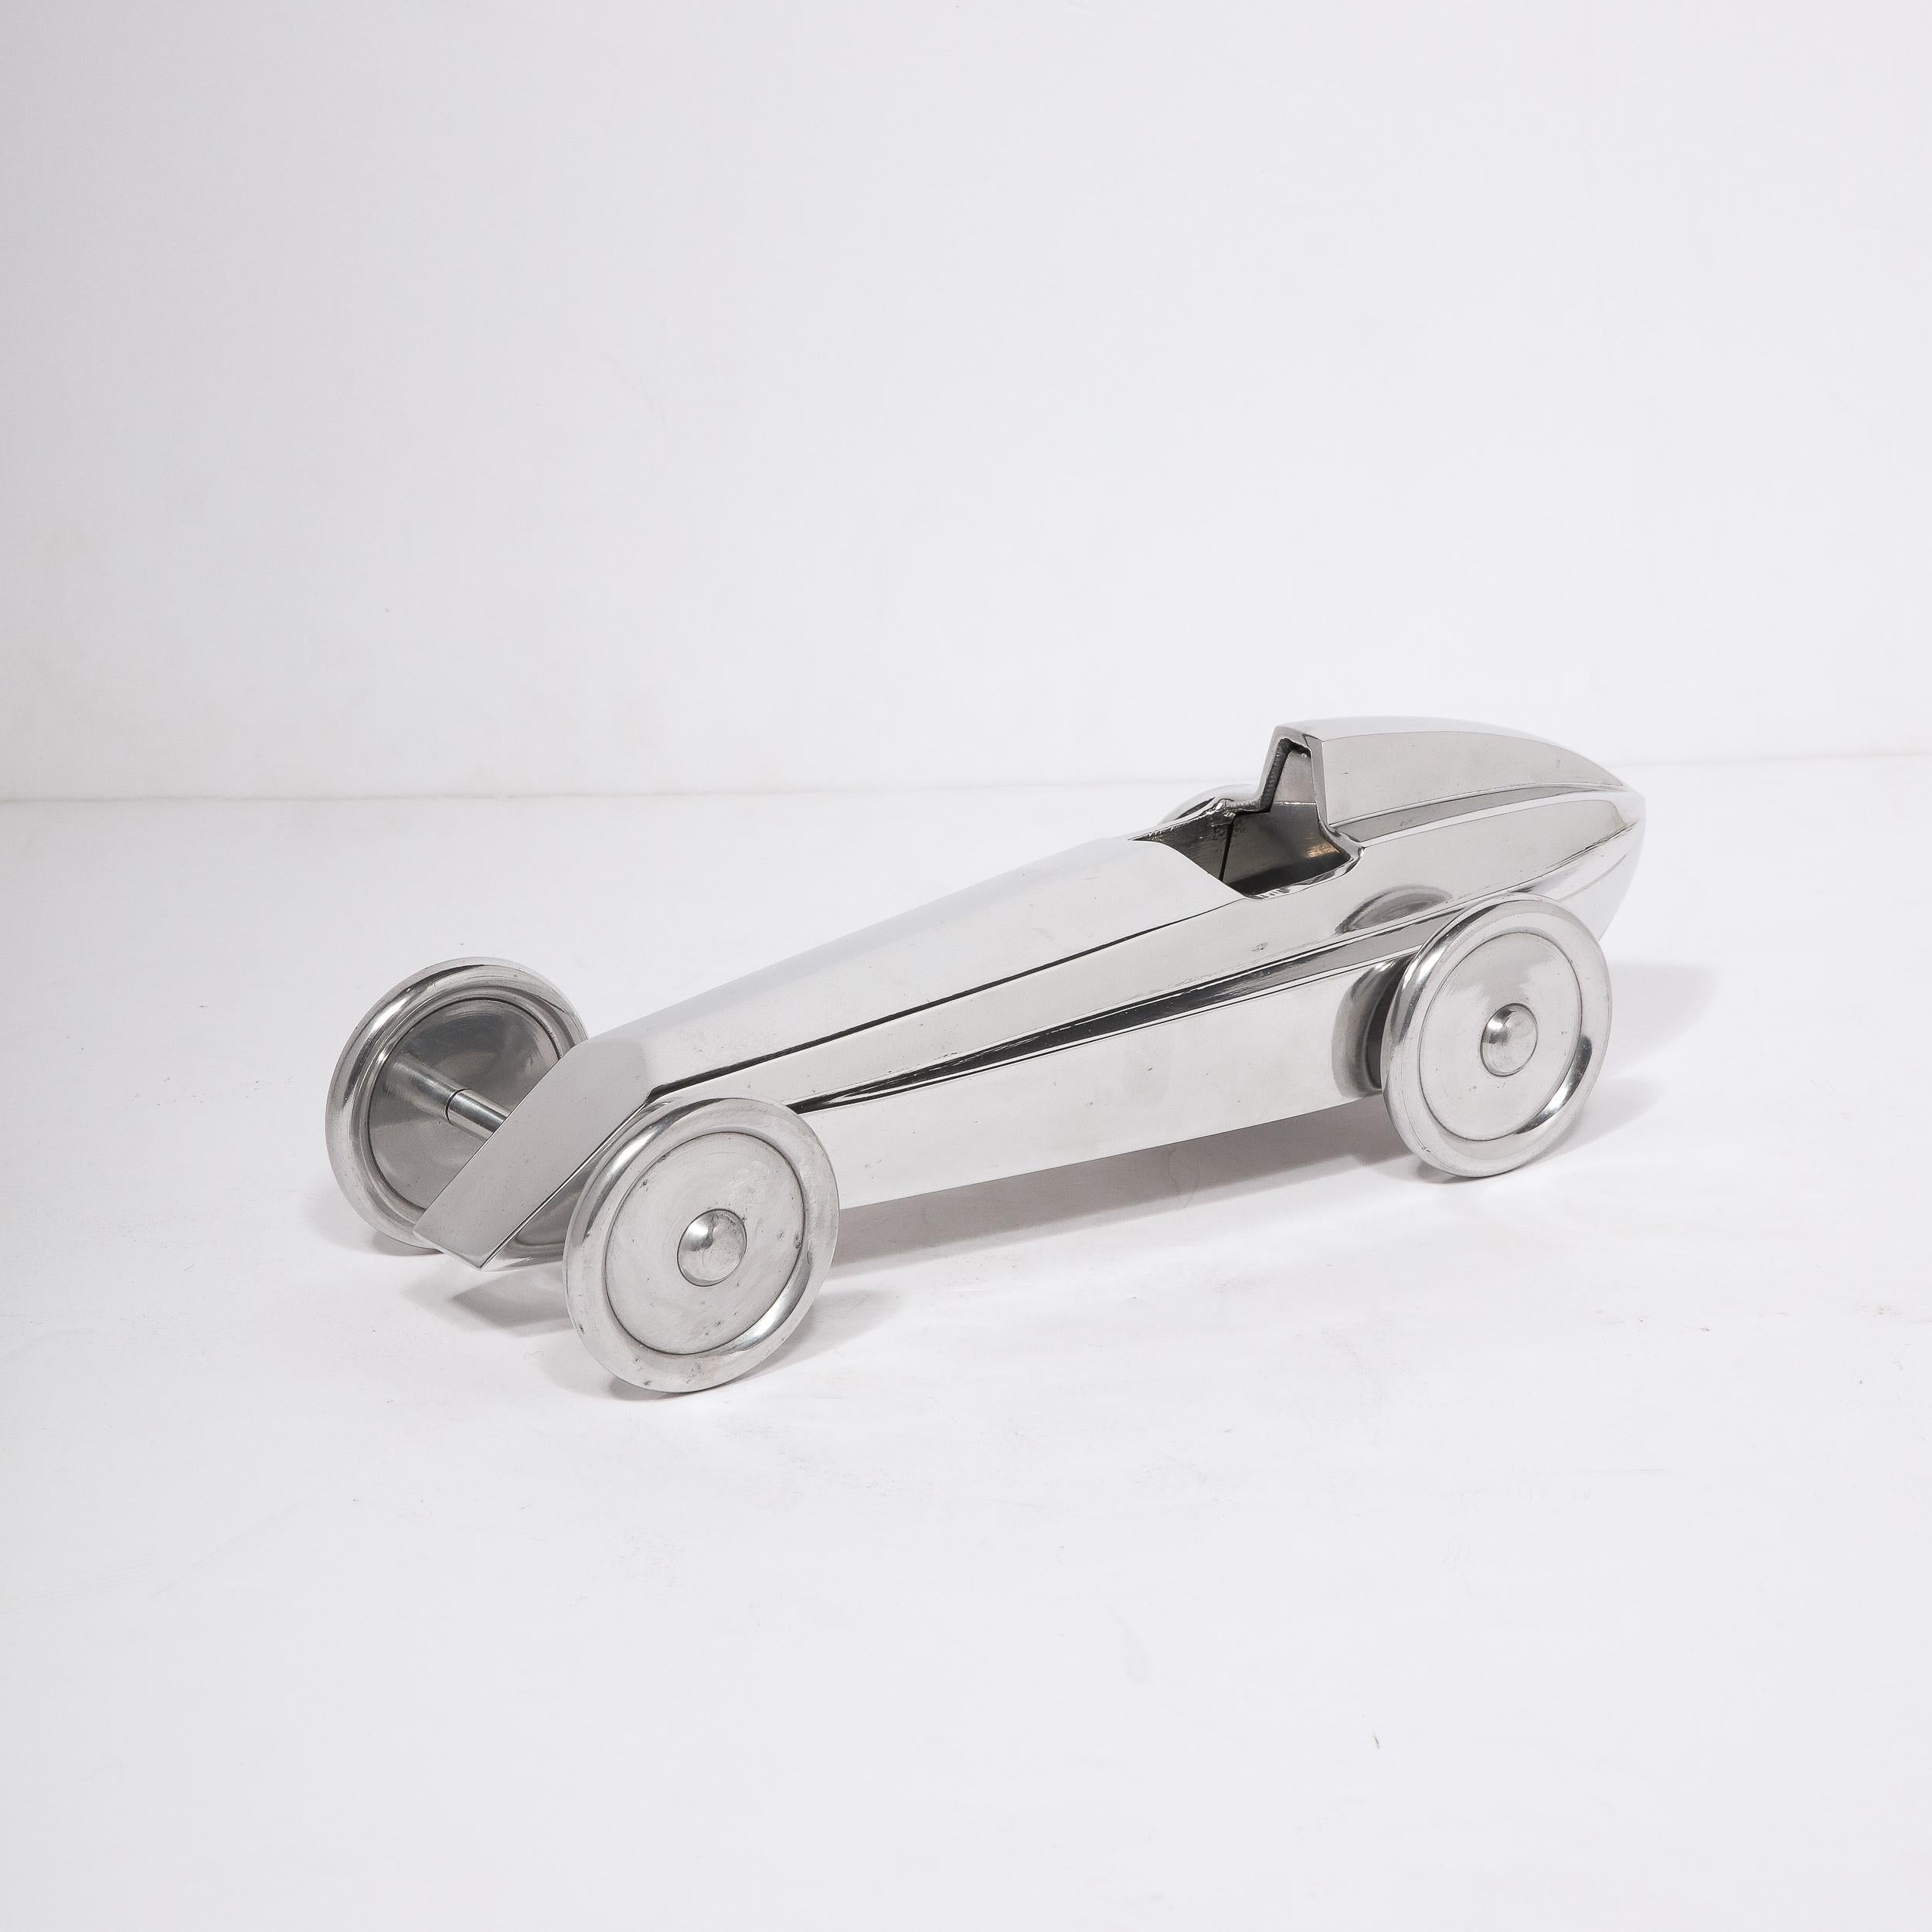 This stunning Art Deco Machine Age race car sculpture was realized in the United States circa 1935. It features a highly stylized race car- reduced to its most elemental aspects- showcasing the modernism of the form. The car sits on four circular